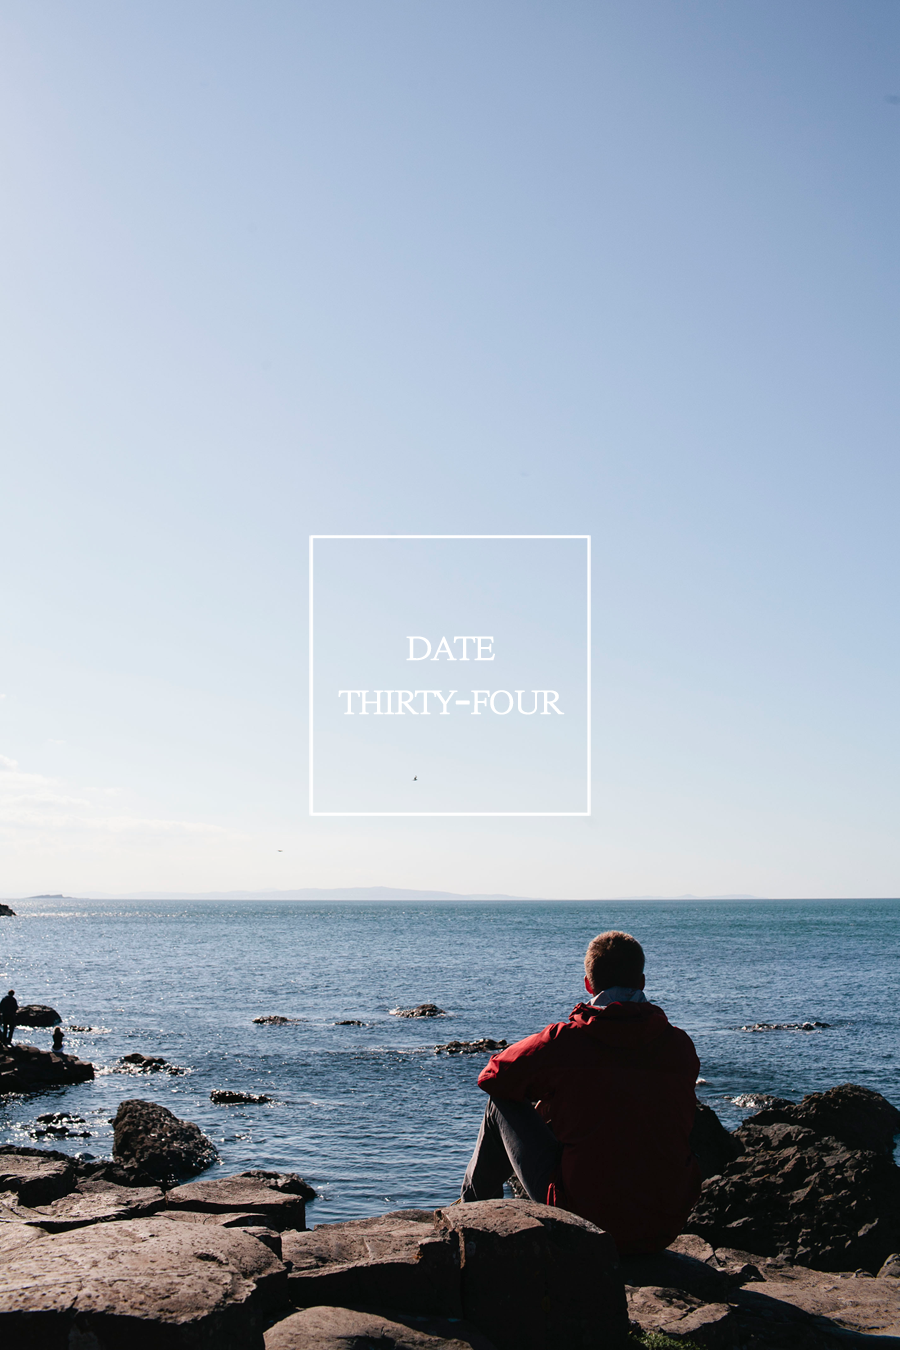 giant's causeway // 52 dates // a thousand threads